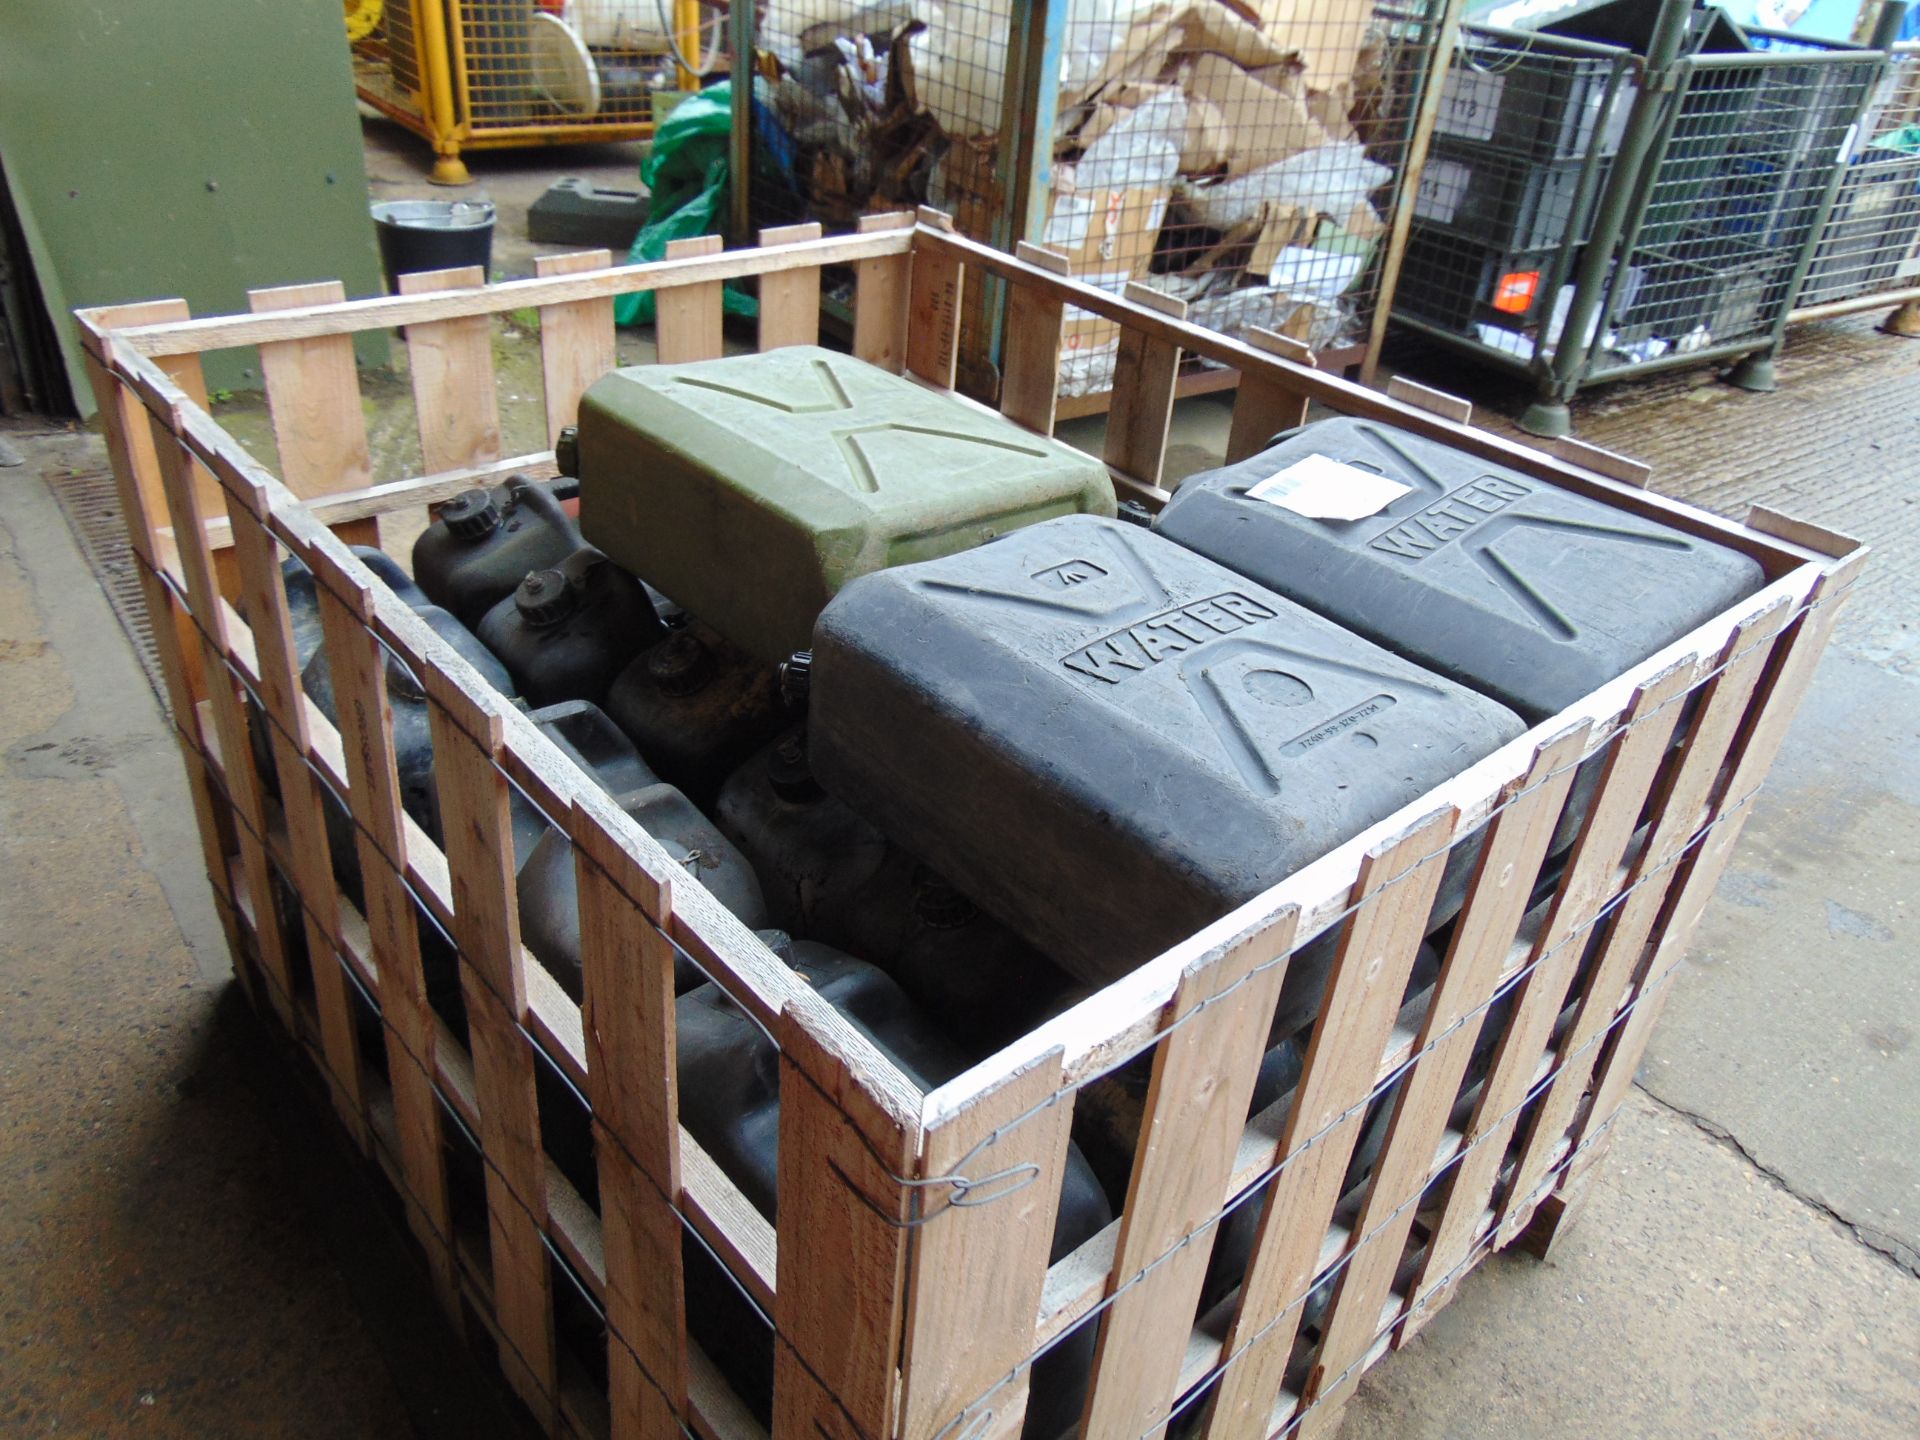 1 x Stillage of 18 x 5 Gall Water Jerry Cans with Caps (Stillage is Included) - Image 2 of 6